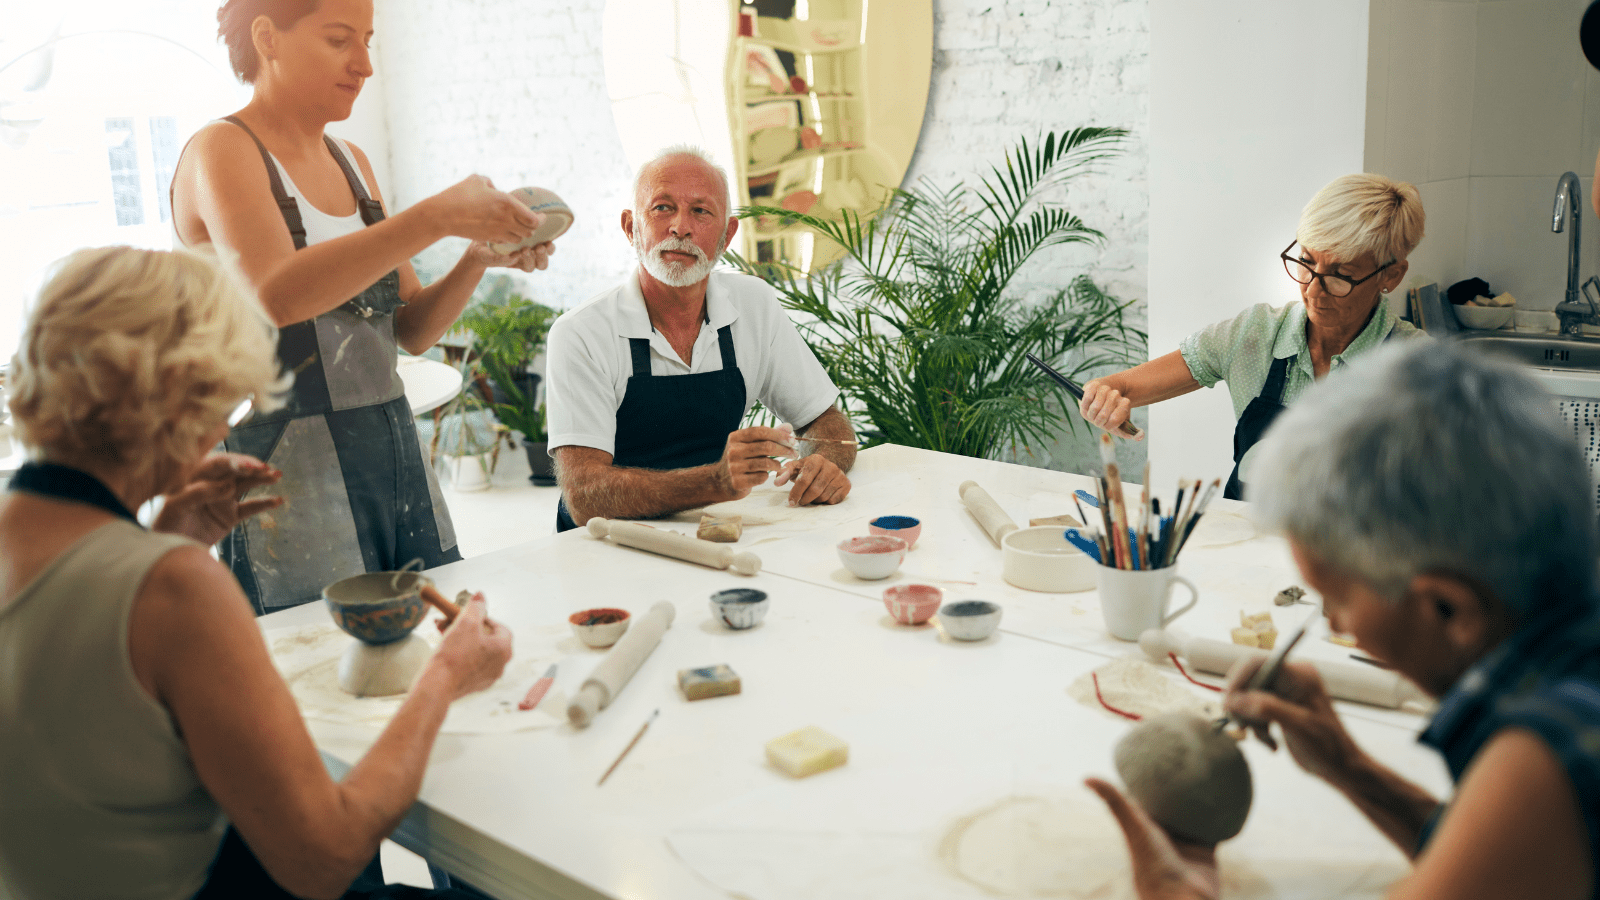 A group of adults sit around a white table working on their clay pots. Some are forming them and others are painting their pots. There are tools and colored glazes on the tables. The room is light filled with a green fern plant in the corner.